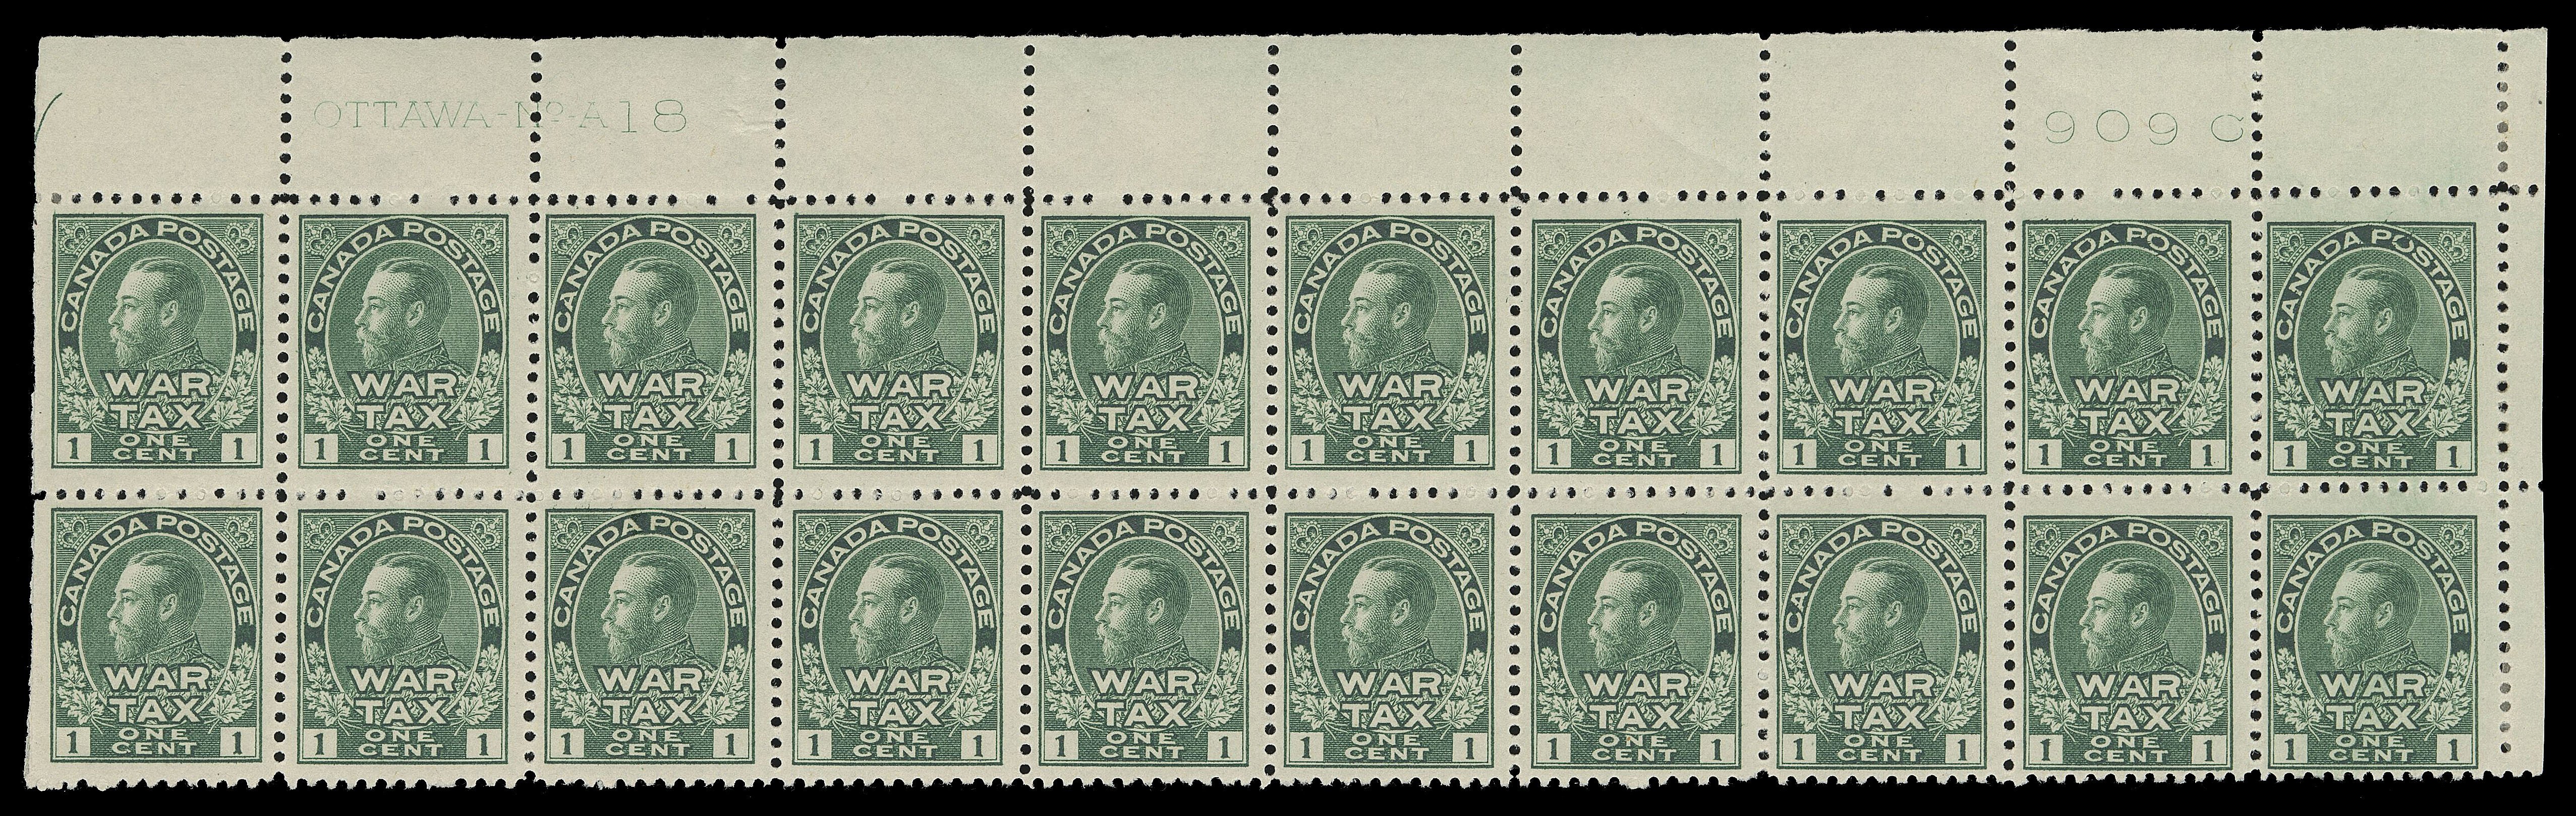 ADMIRAL STAMPS  MR1,Upper right Plate 18 block of twenty with printing order number "909C" at right, hinged on end columns leaving sixteen stamps NH, fresh and F-VF; very scarce (Unitrade cat. $1,220)